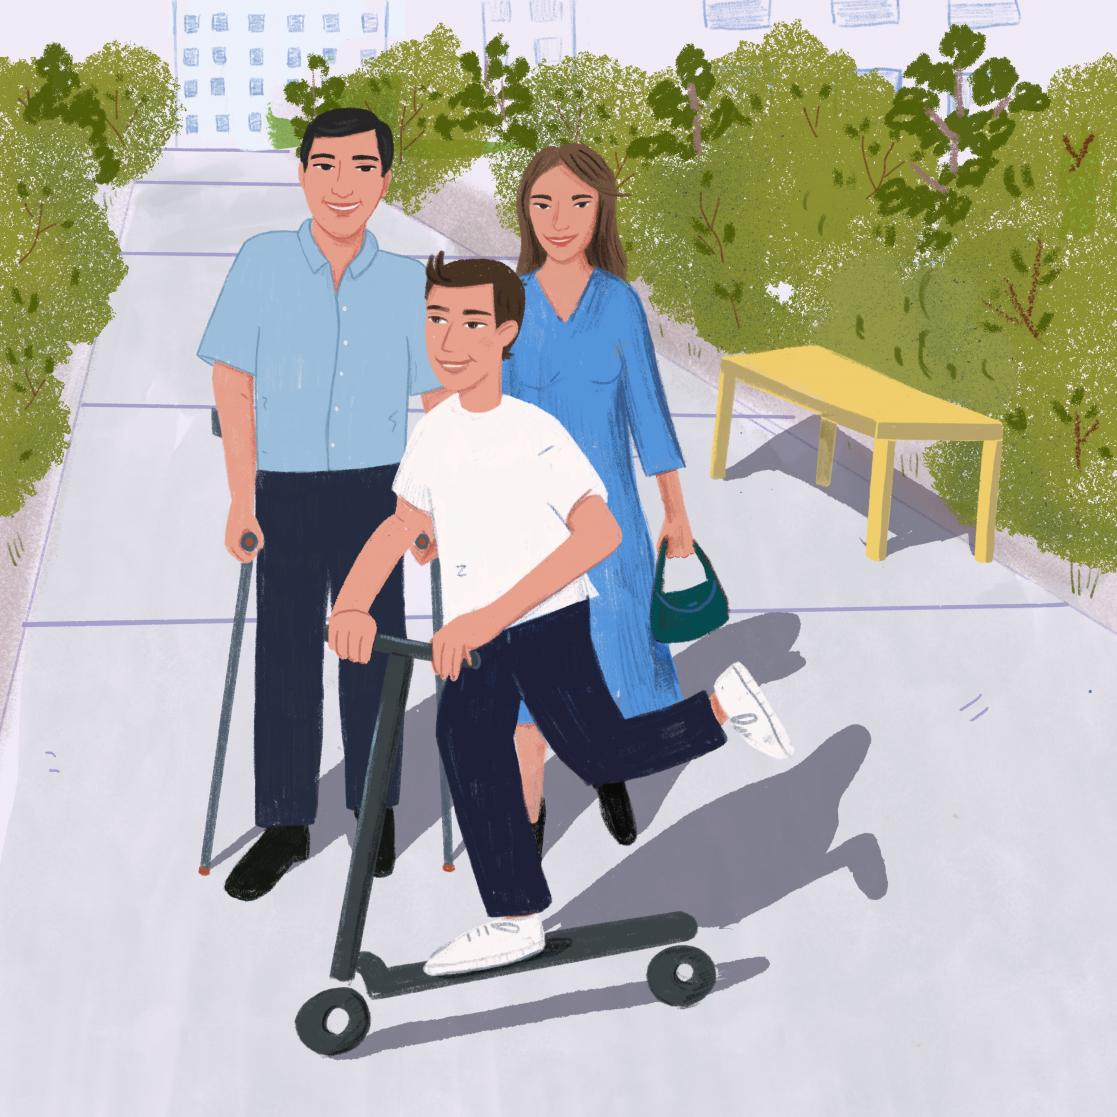 Cartoon of a family consisting of mother, father and child in which the child rides a scooter and the father walks with crutches.